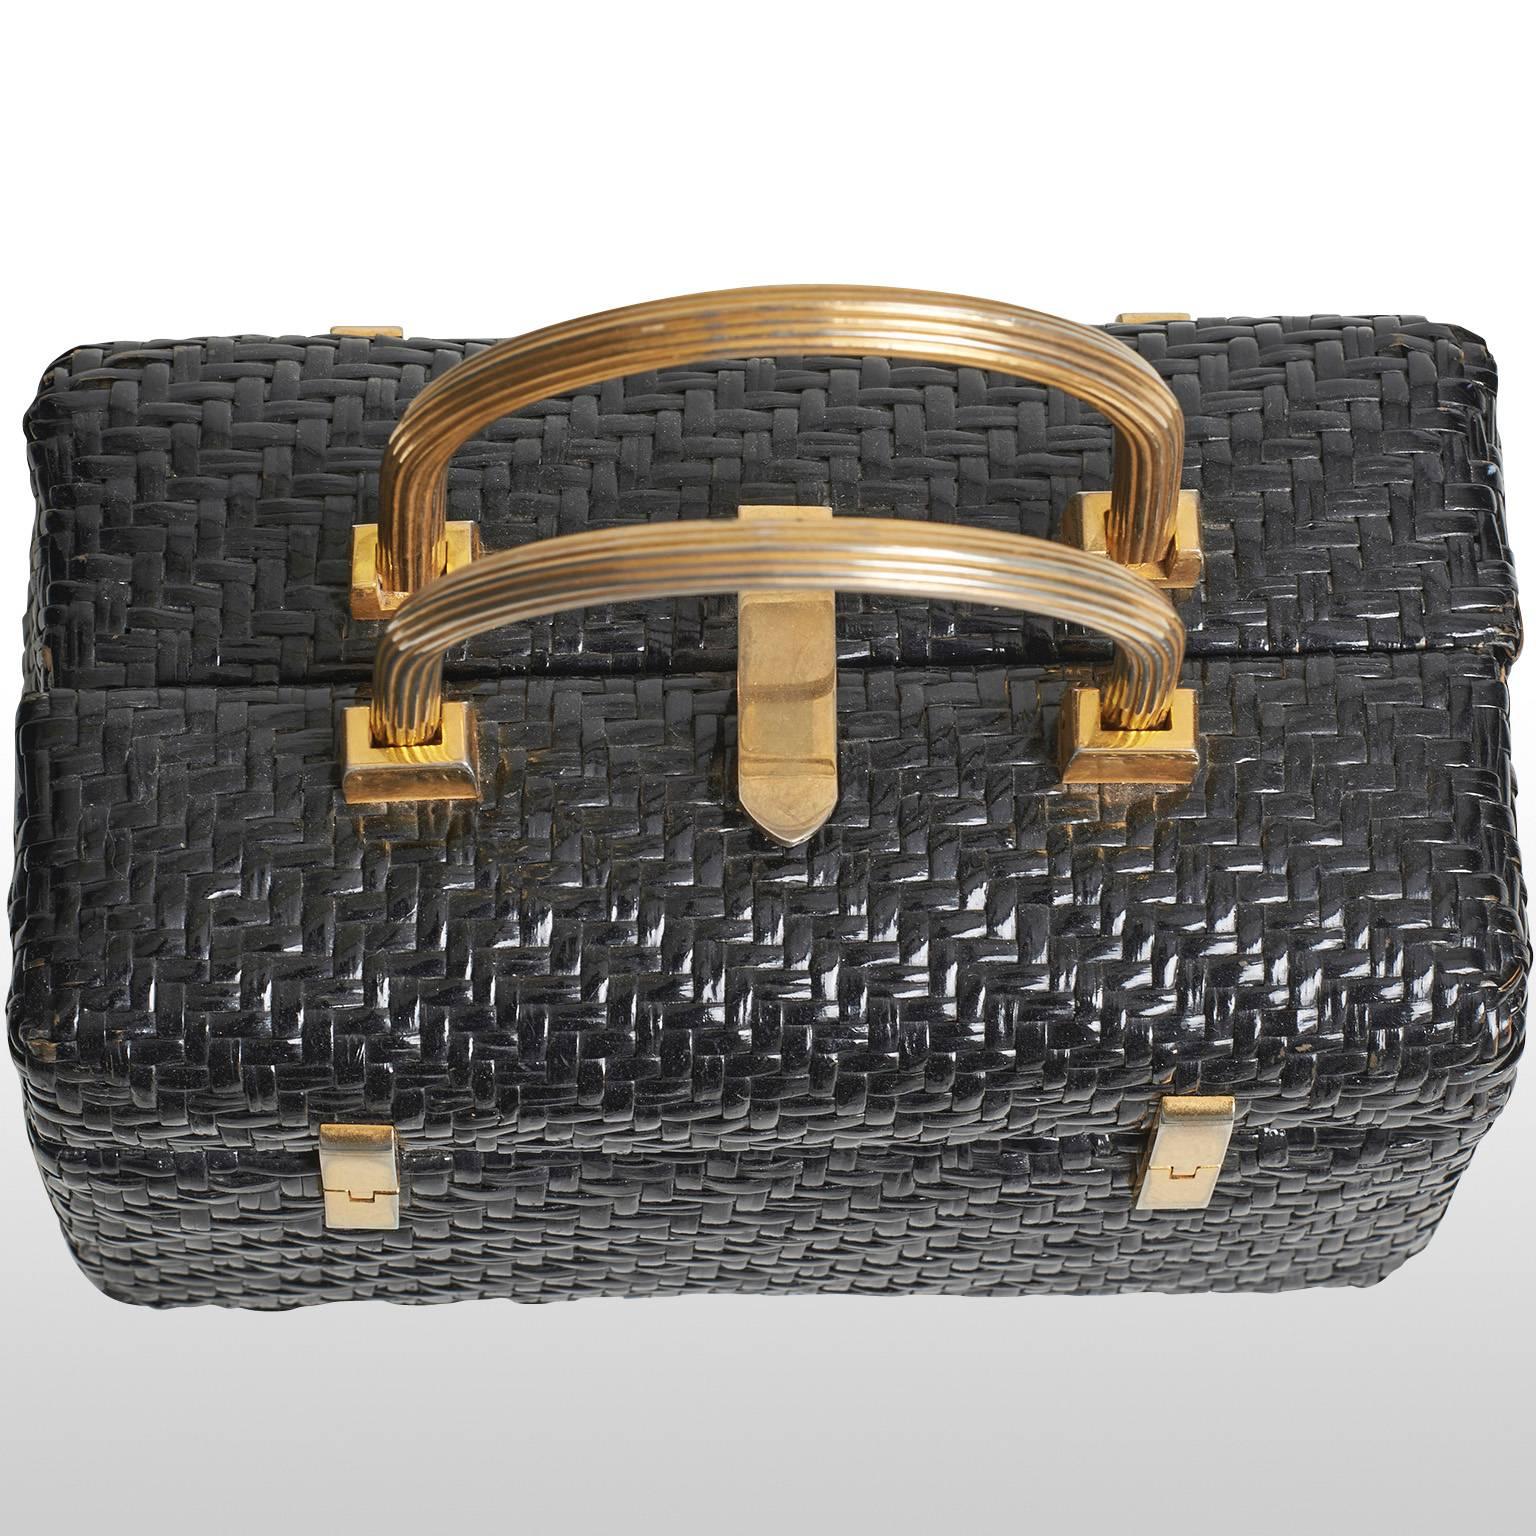 1960's Funky Black Wicker Koret Hand Bag In Excellent Condition For Sale In London, GB